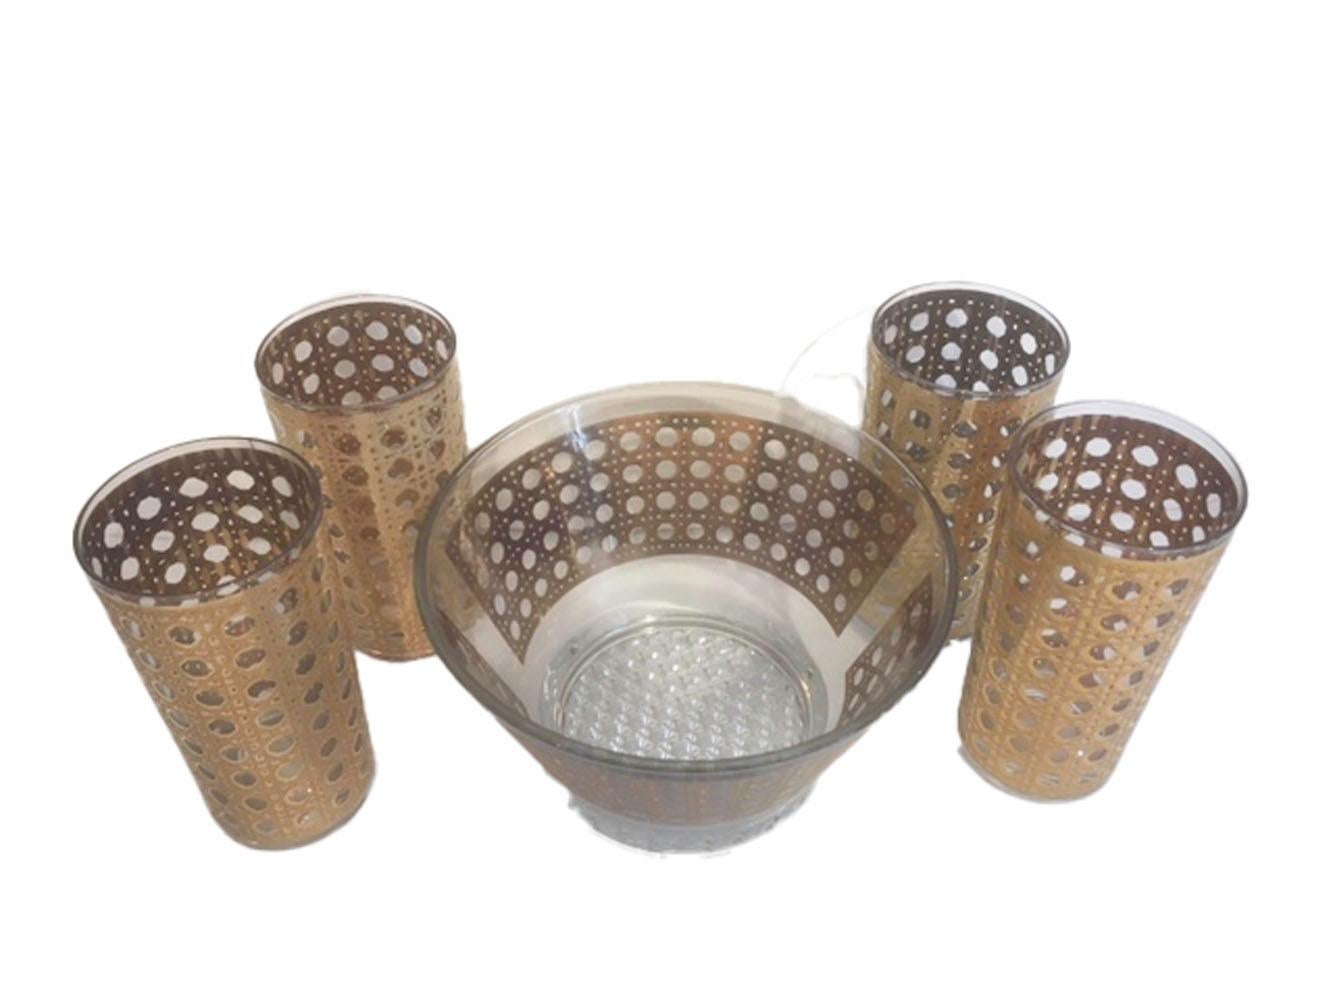 Mid century ice bowl and eight highball glasses in the Canella pattern by Culver. Canella is one of the most sought after Culver patterns, decorated in 22 karat gold with a raised textured surface, it is designed to imitate woven cane. The ice bowl